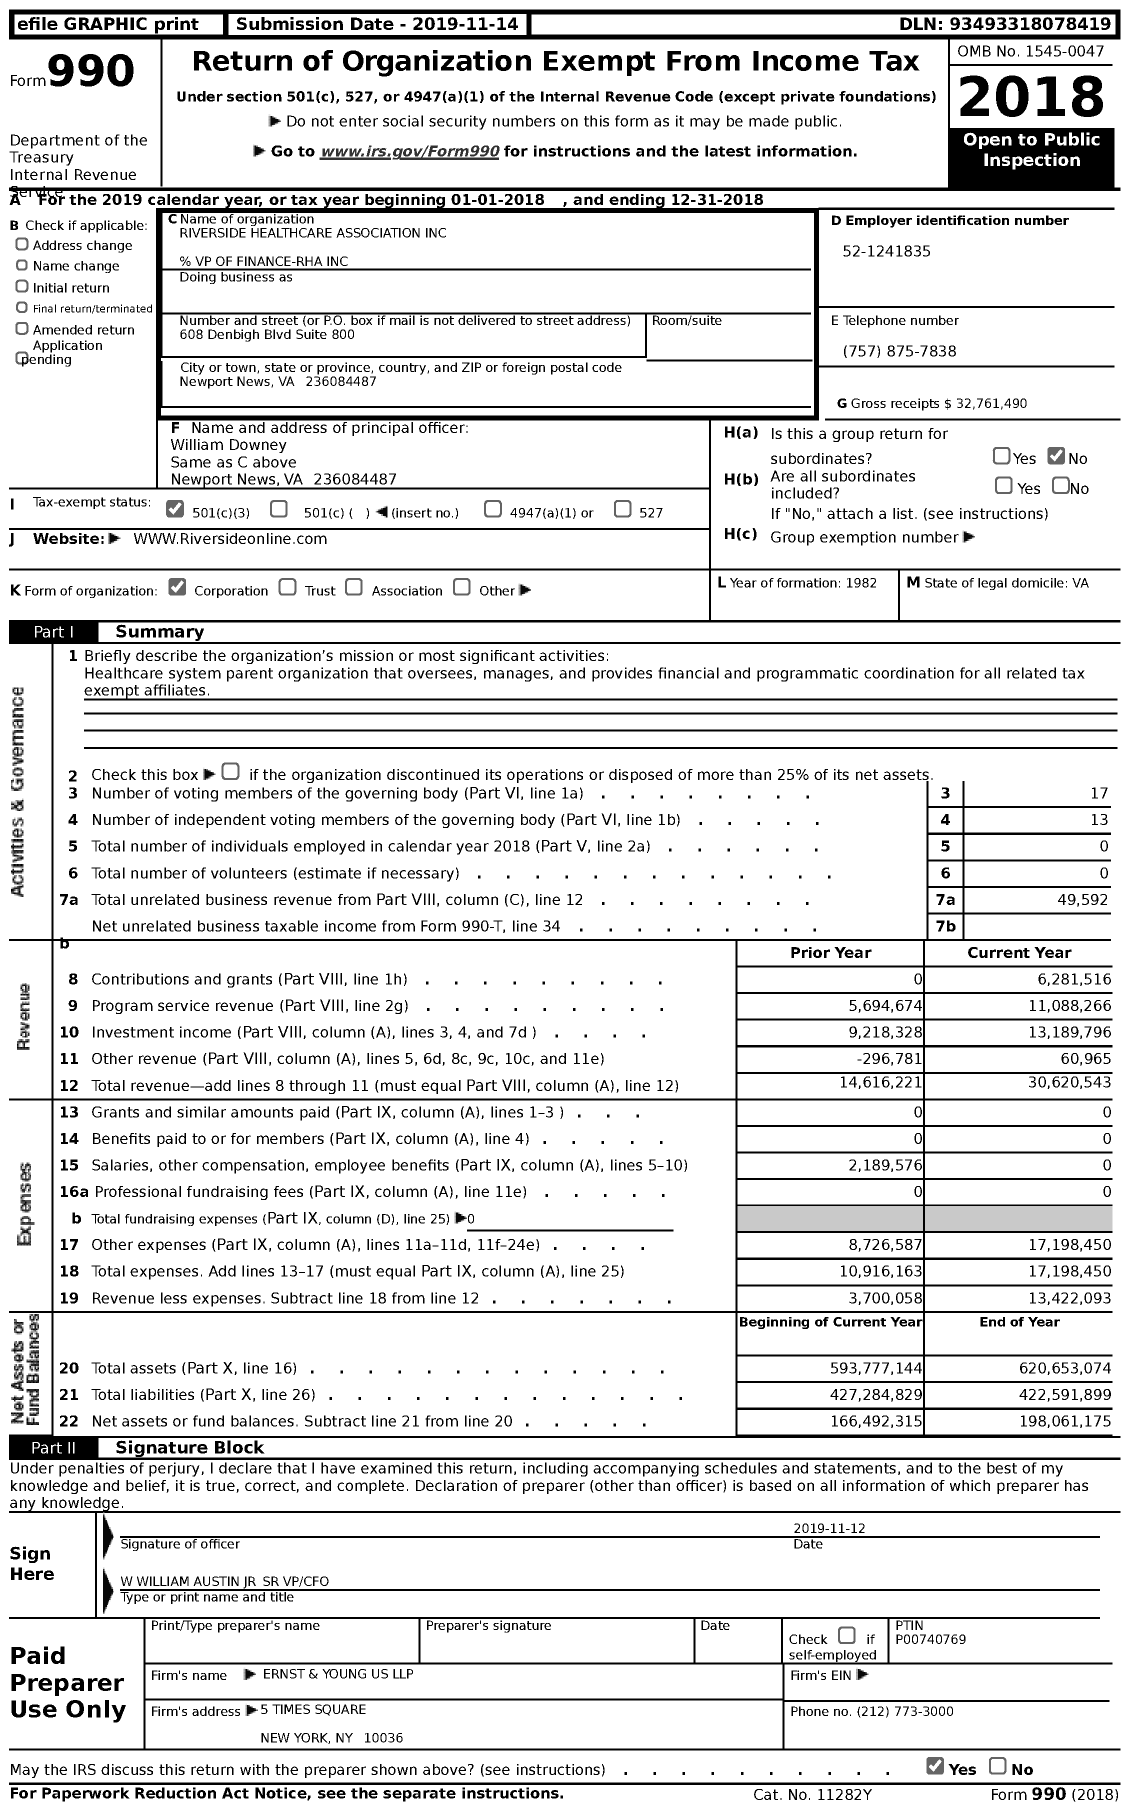 Image of first page of 2018 Form 990 for Riverside Healthcare System (RHS)